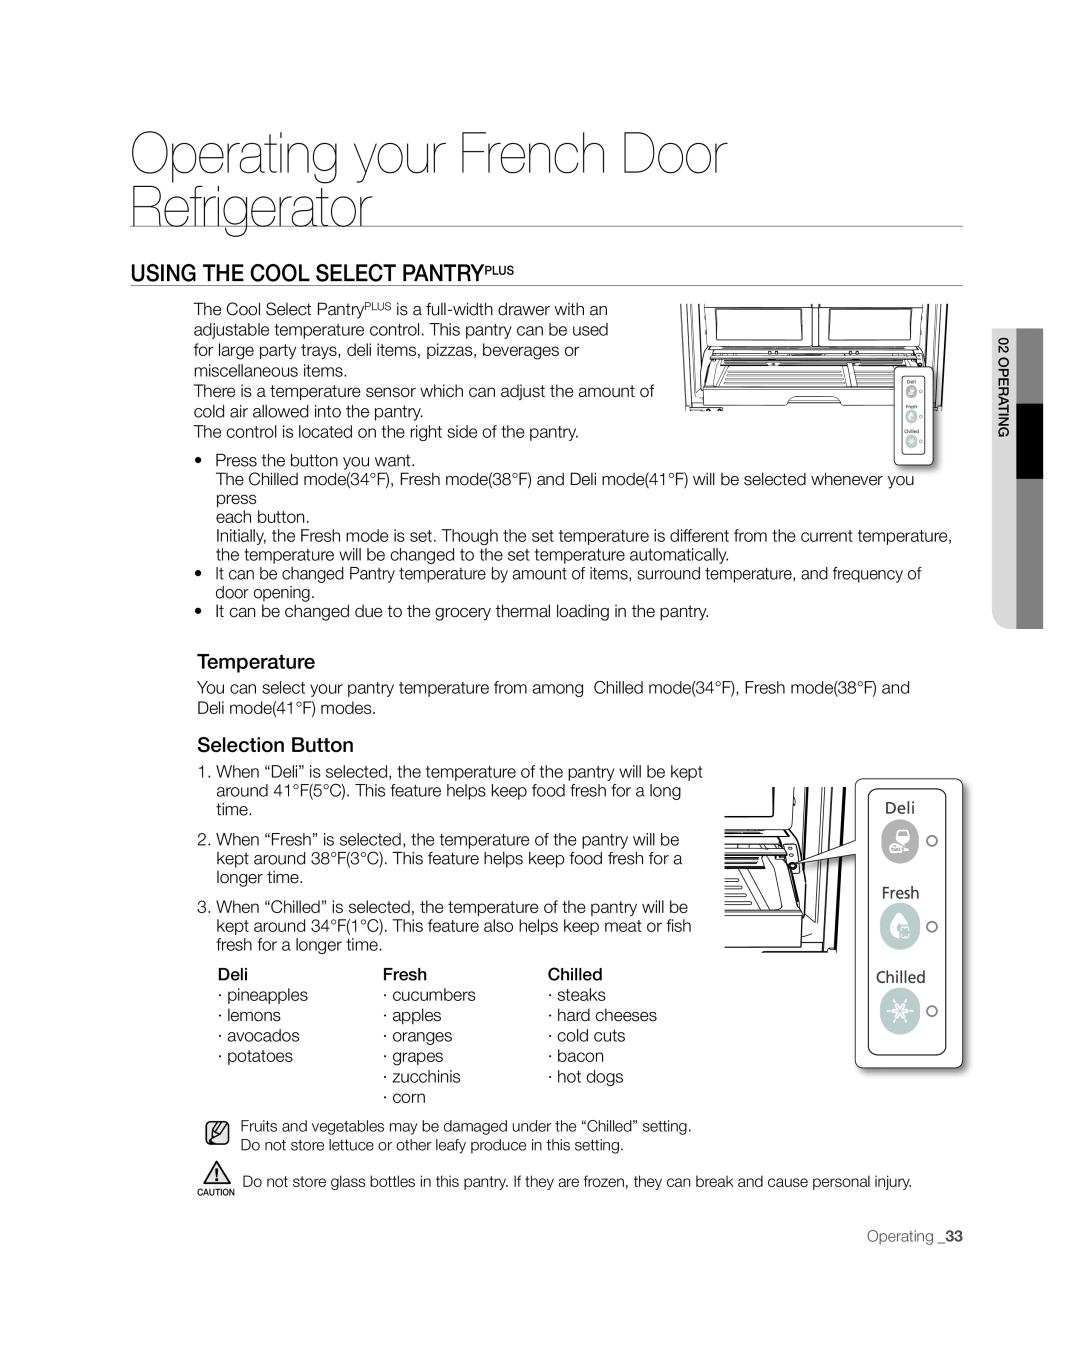 Samsung RFG238AARS, RFG237 Using The Cool Select Pantryplus, Operating your French Door Refrigerator, Temperature 